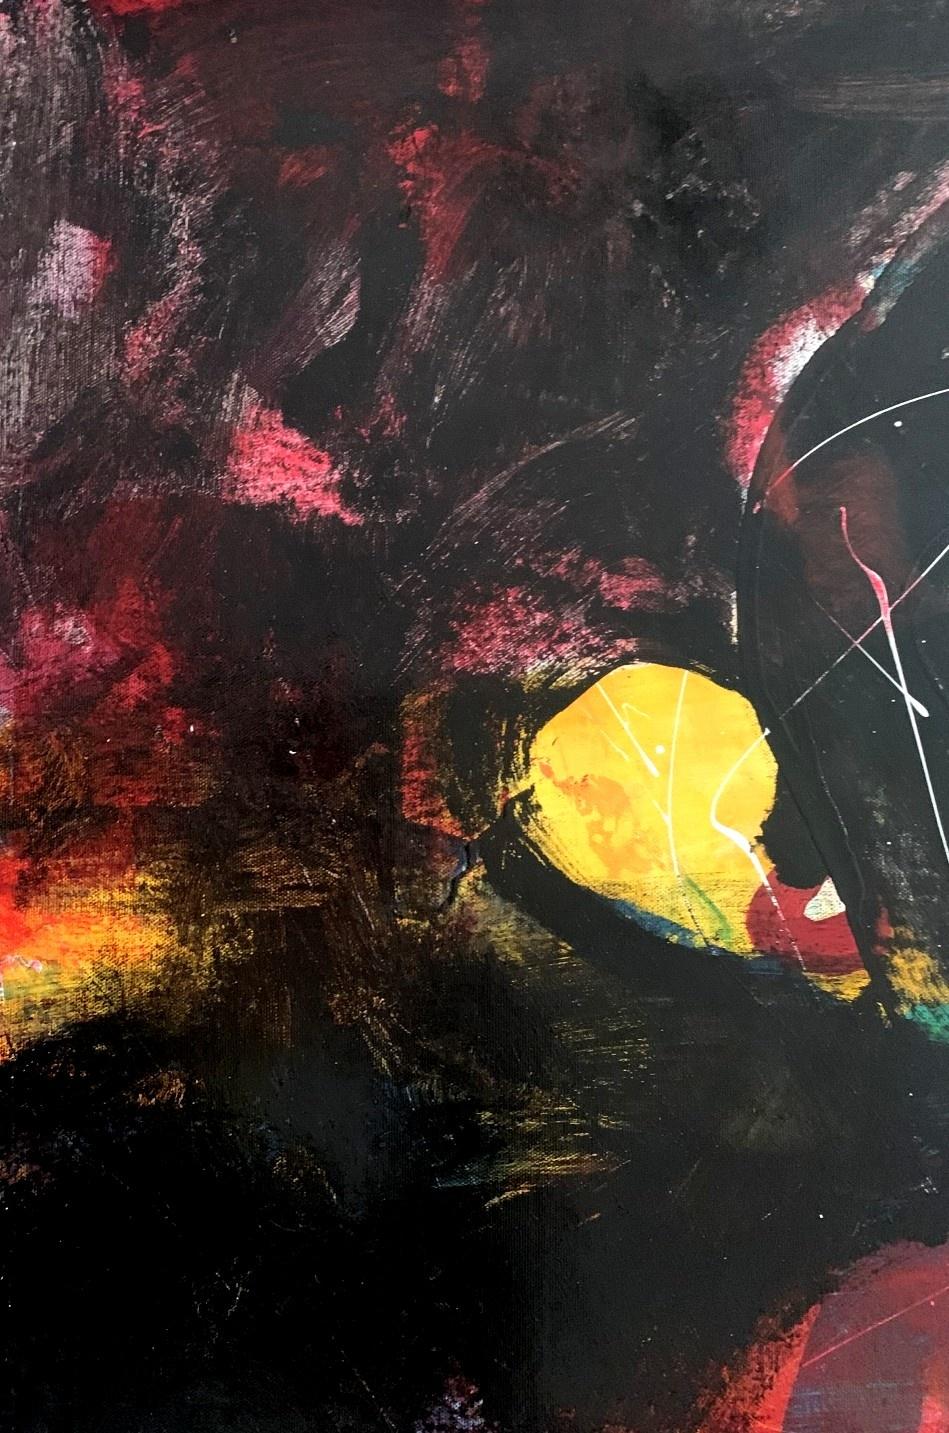 Abstract painting by Polish artist living in USA Monika Rossa. Painting in style of gestural abstraction with dynamic brush strokes and shapes. Main color is red balanced with yellow and black as well as blue accents. Do to the composition, the